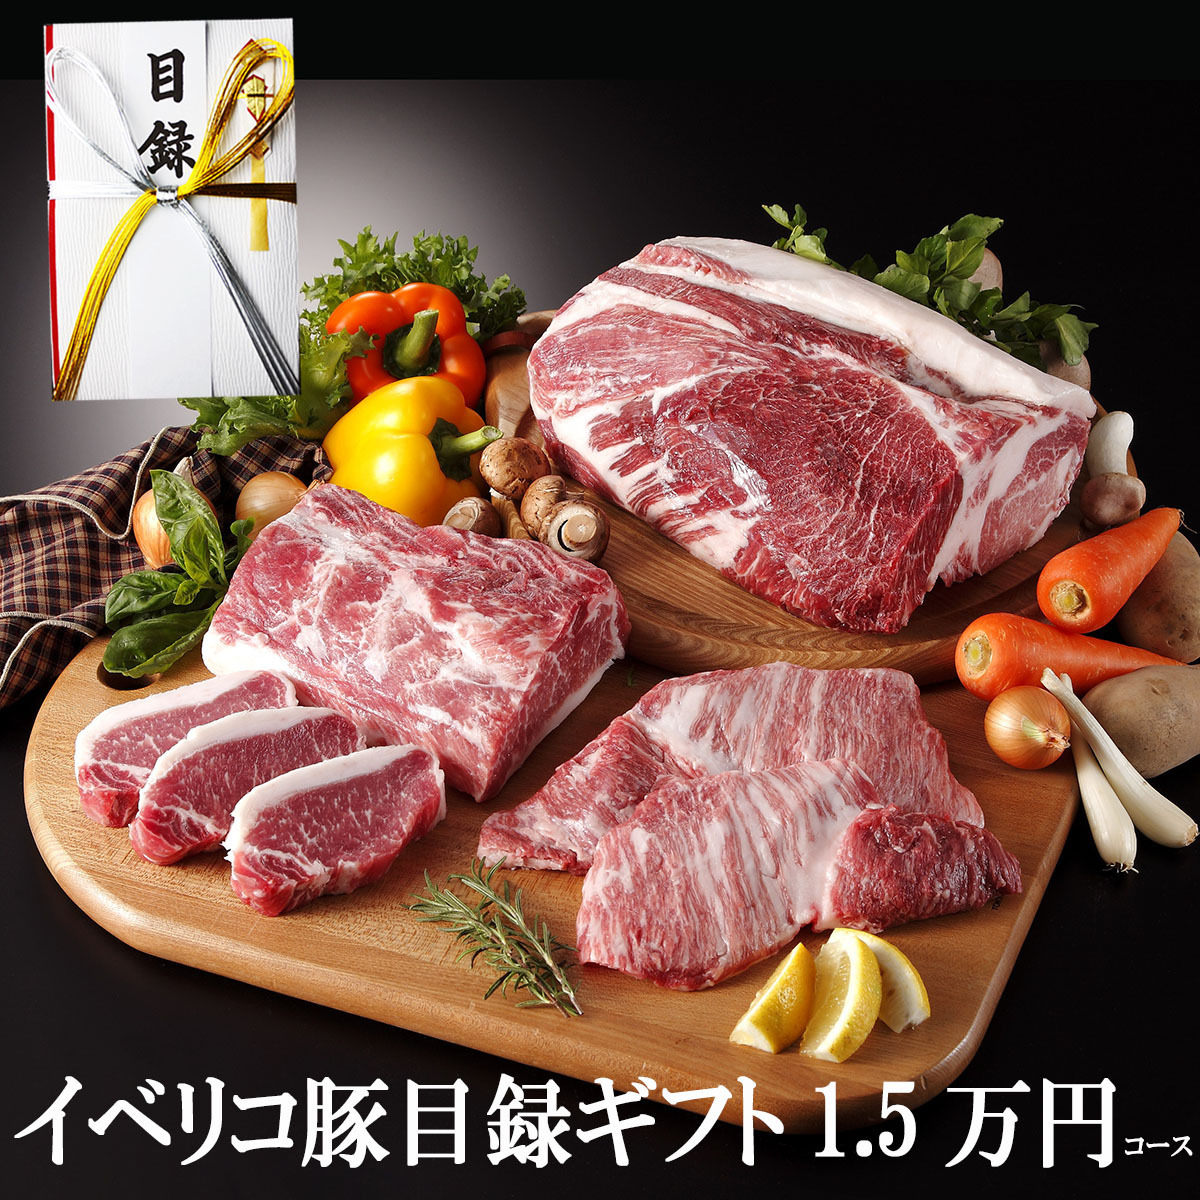 ibe Rico pig list gift 15000 jpy course set panel attaching Golf competition . meat gift meat high class 